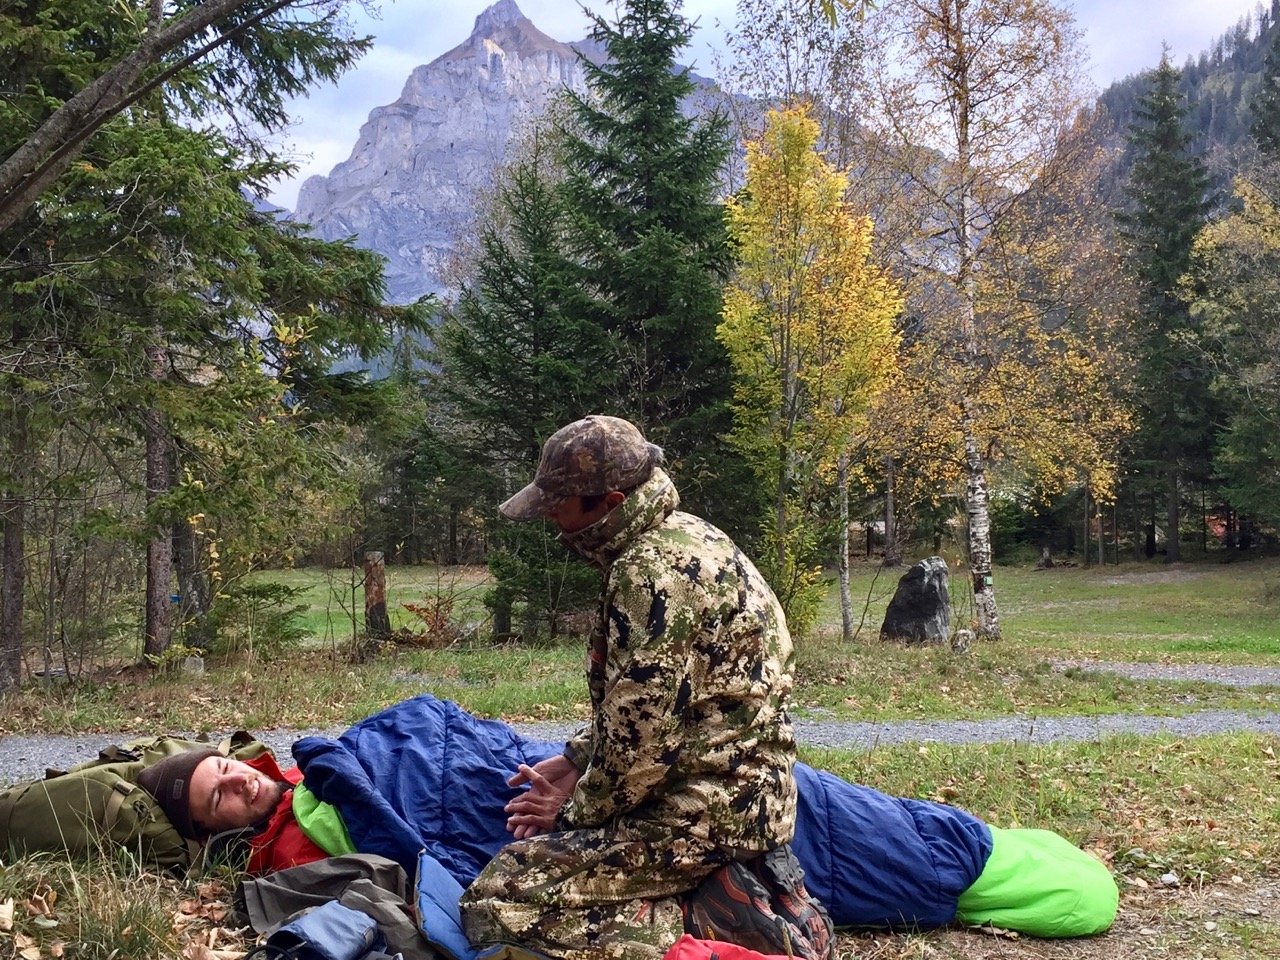 NOLS Wilderness Medicine student practices caring for a patient wrapped in a sleeping bag in the mountains